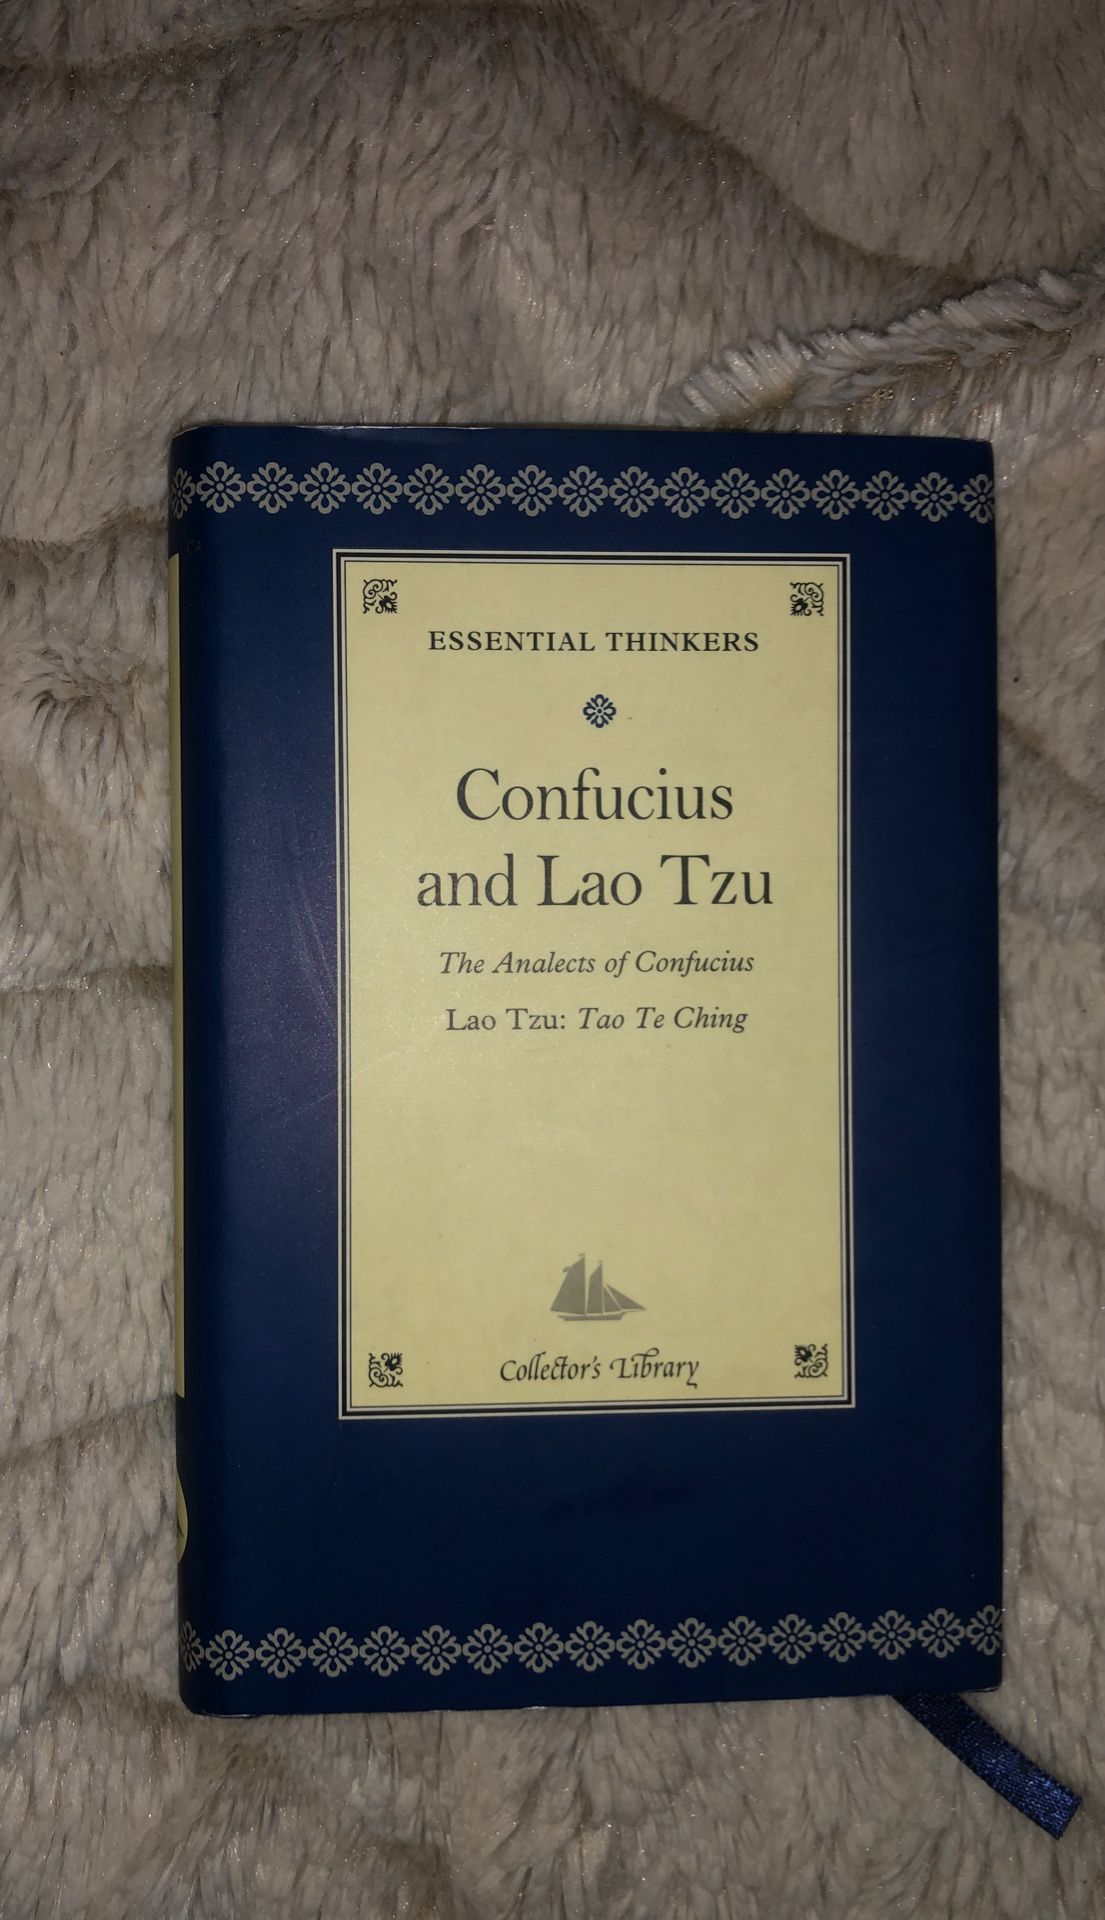 Confucius and Lao Tzu - The Analects of Confucius, Lao Tzu: Tao Te Ching